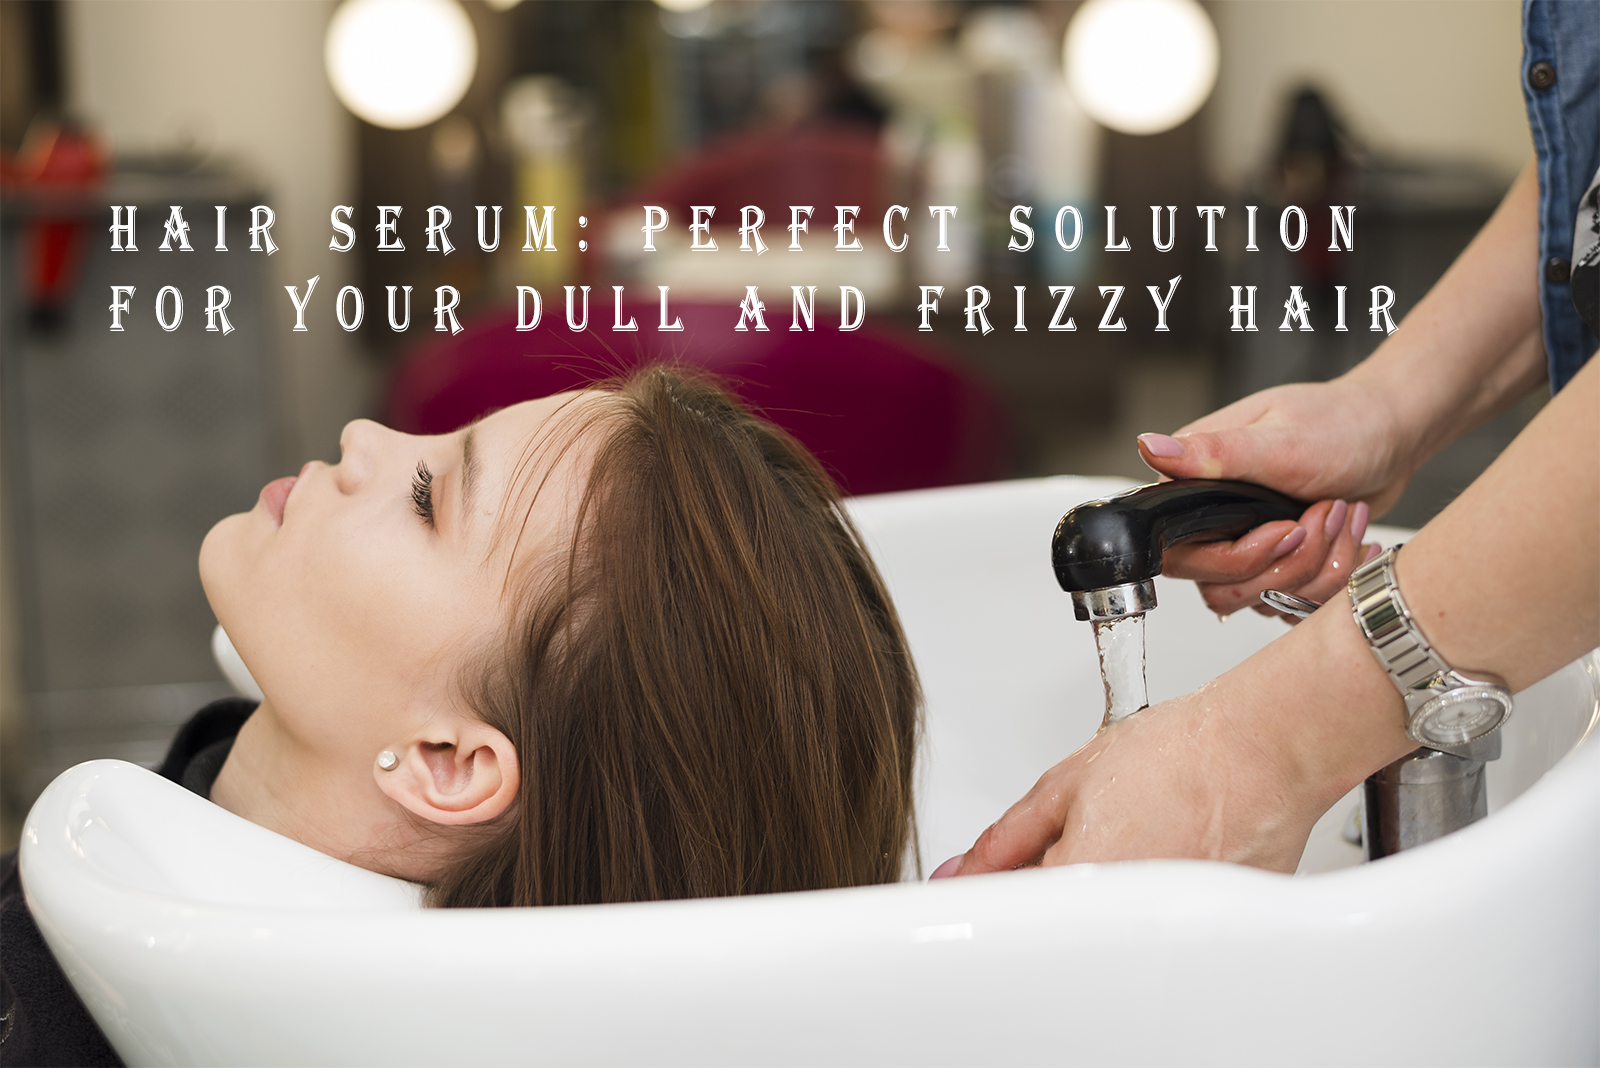 Hair Serum: Perfect Solution for Your Dry and Frizzy Hair